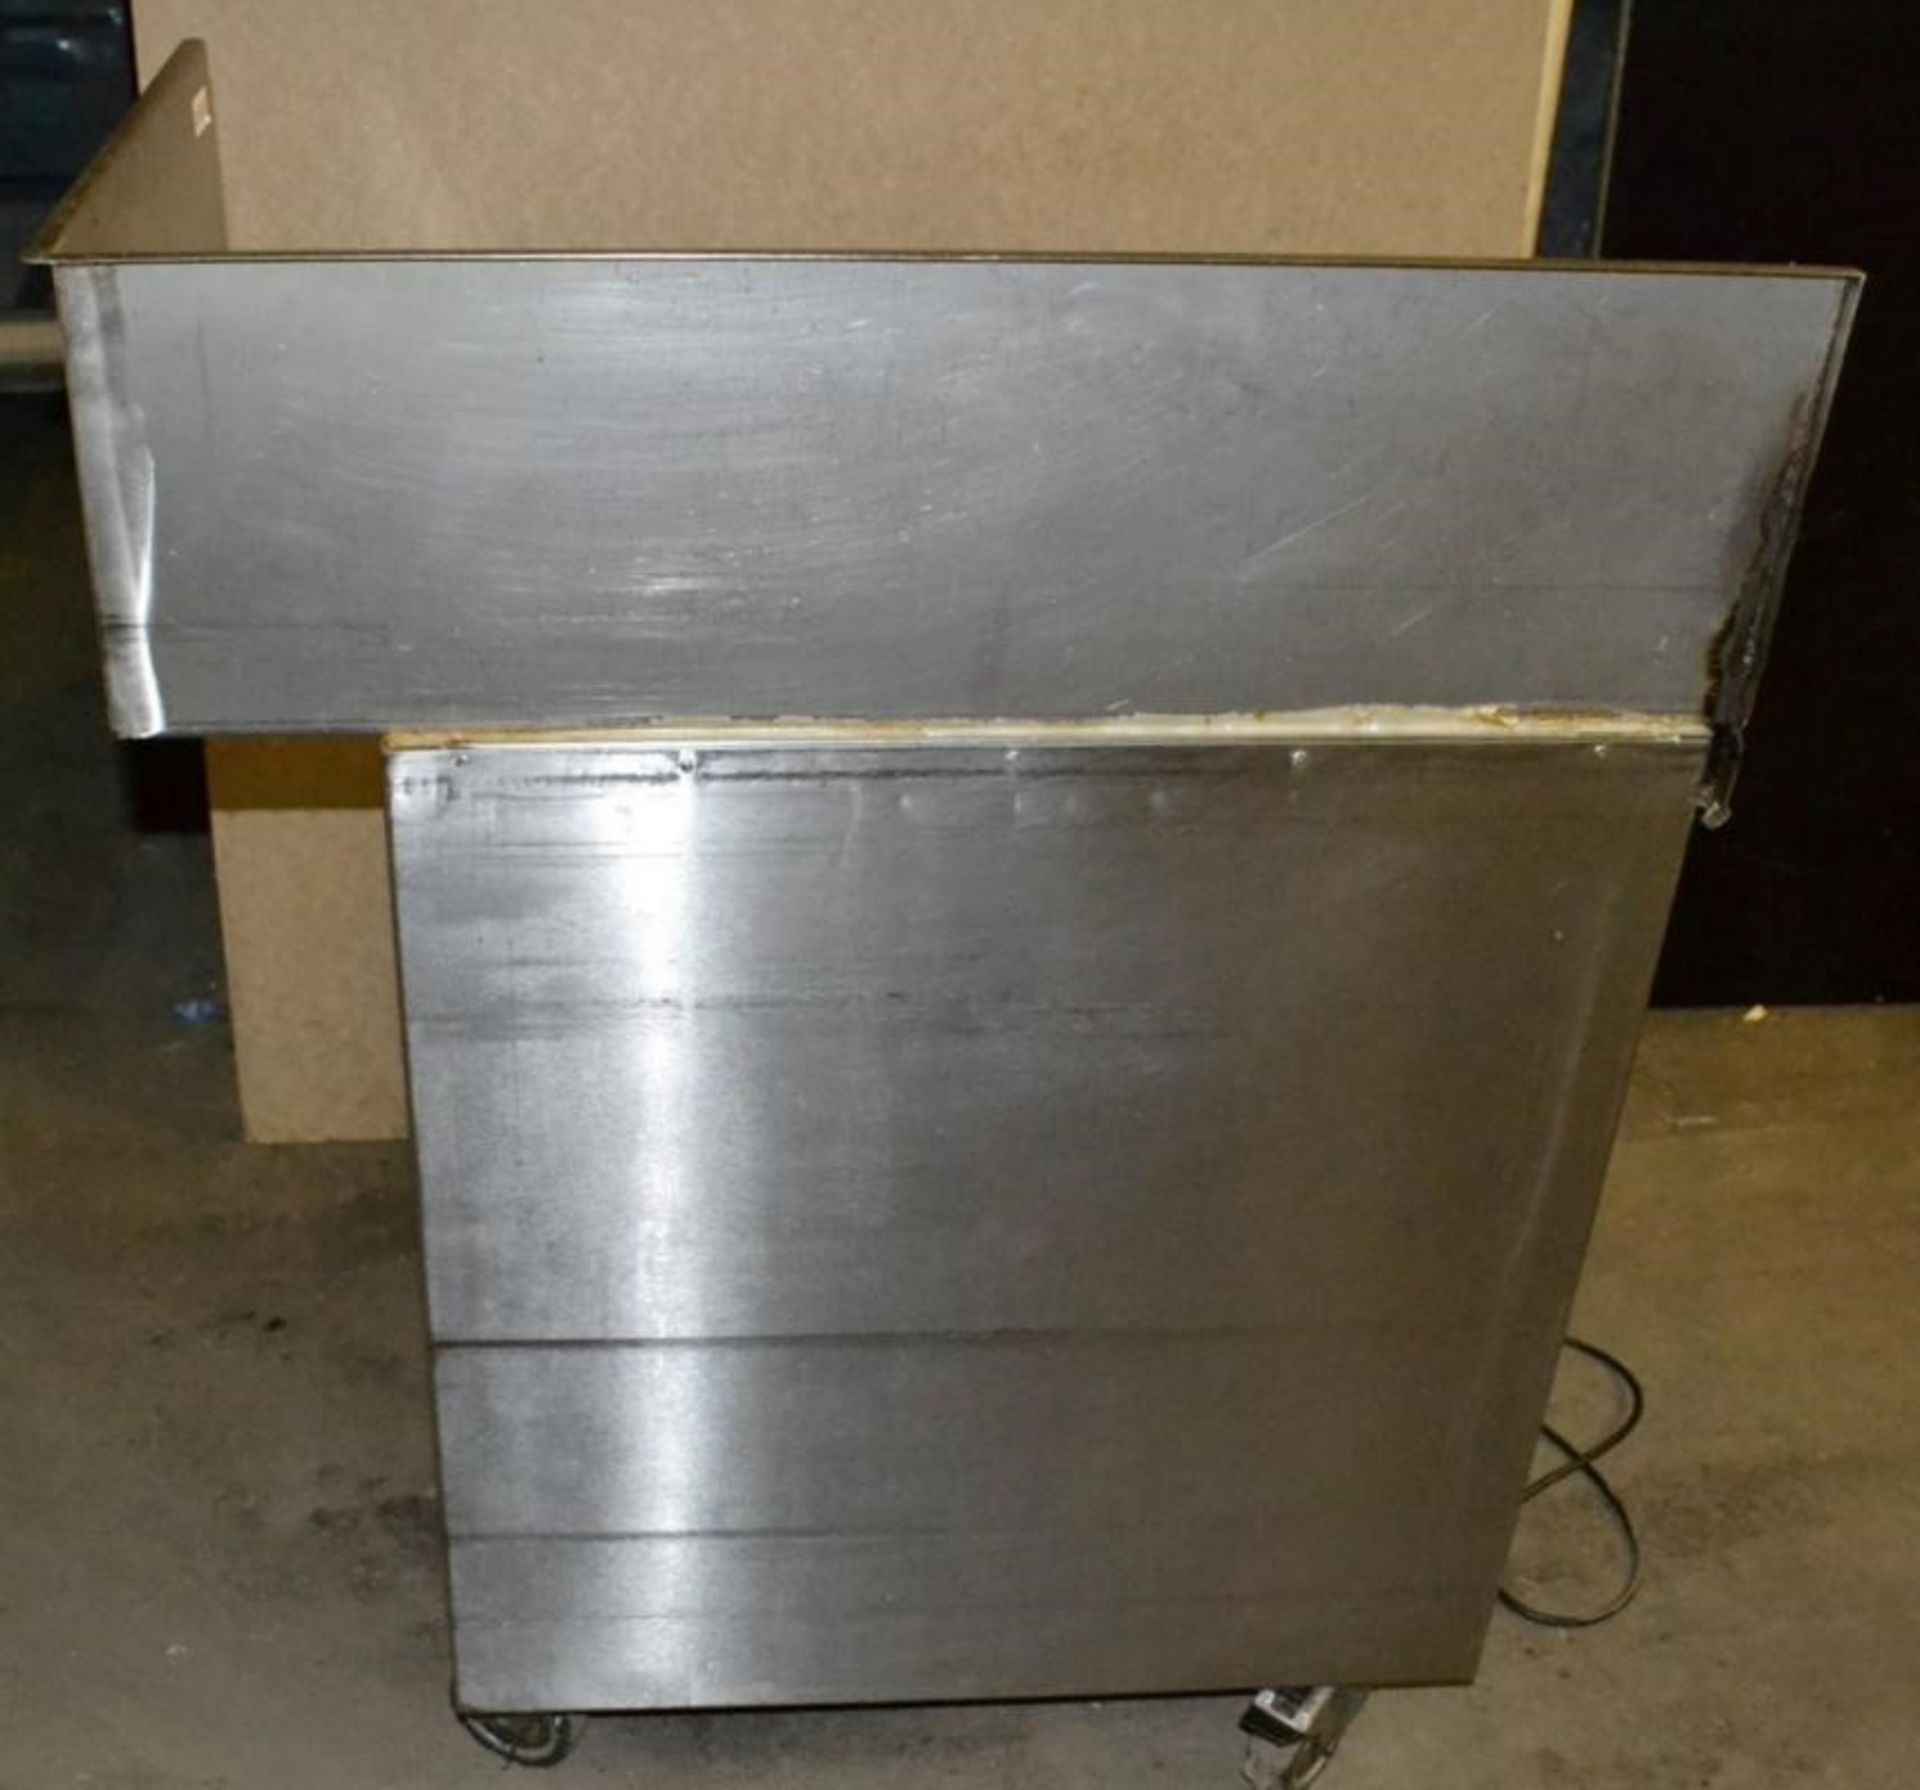 1 x Stainless Steel Commercial Hot Cupboard With Corner Spashback - Dimensions: 85 x 50 x H110cm - C - Image 4 of 4